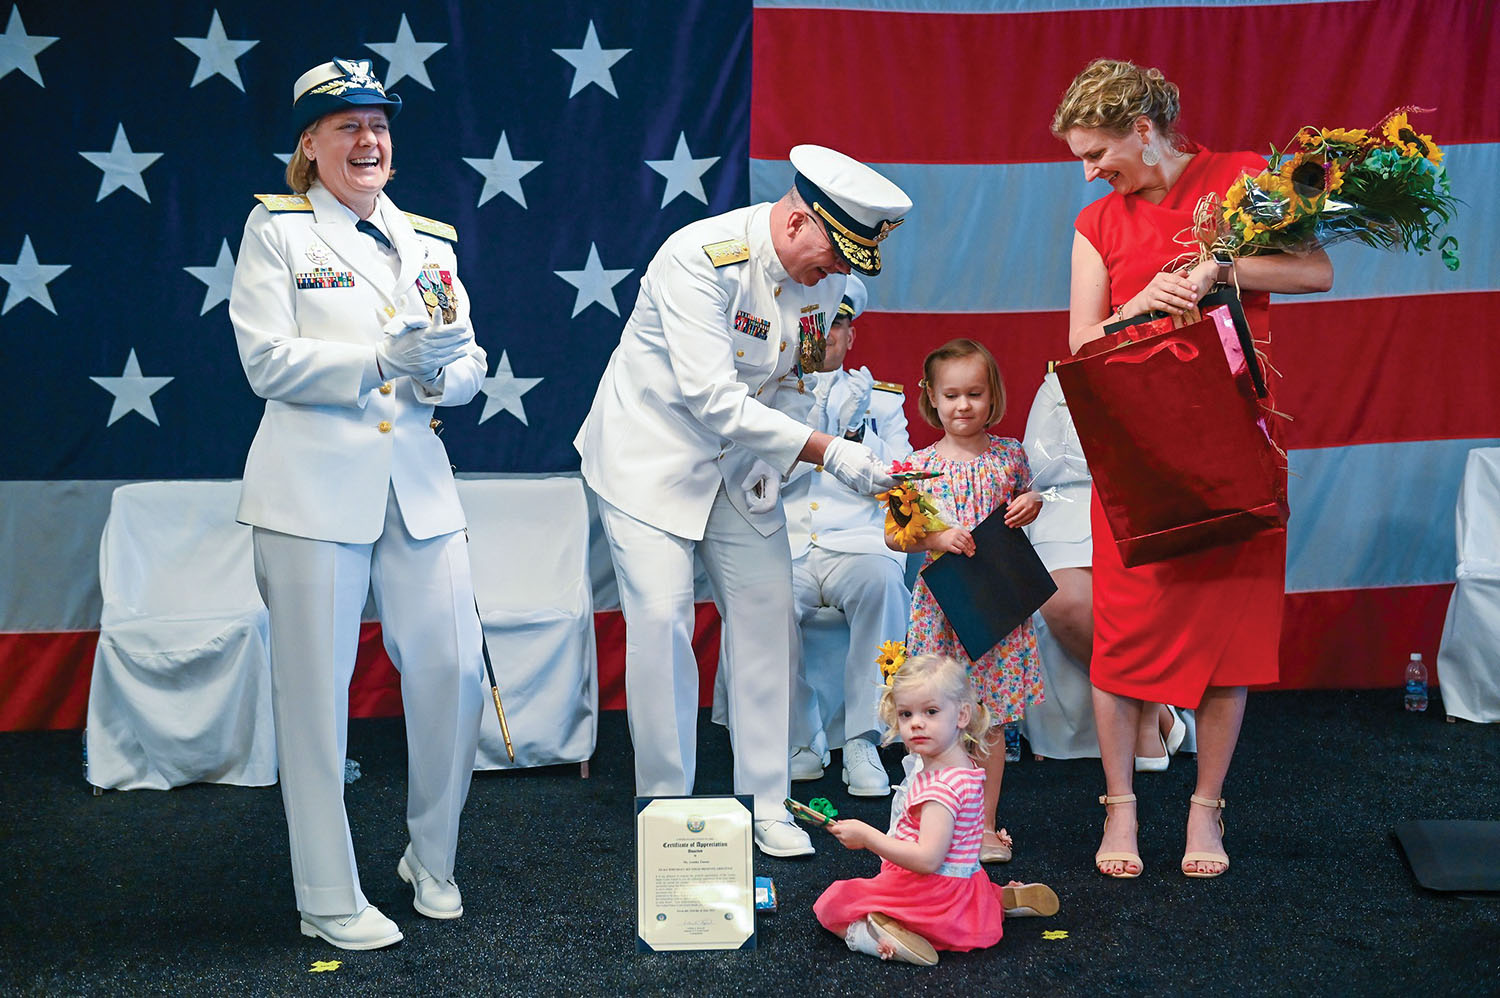 Rear Adm. Richard Timme is joined on stage during his retirement ceremony by his two daughters and his wife, Bettina. Coast Guard Commandant Adm. Linda Fagin, who led the ceremony, enjoys the moment. (Photo by Frank McCormack)